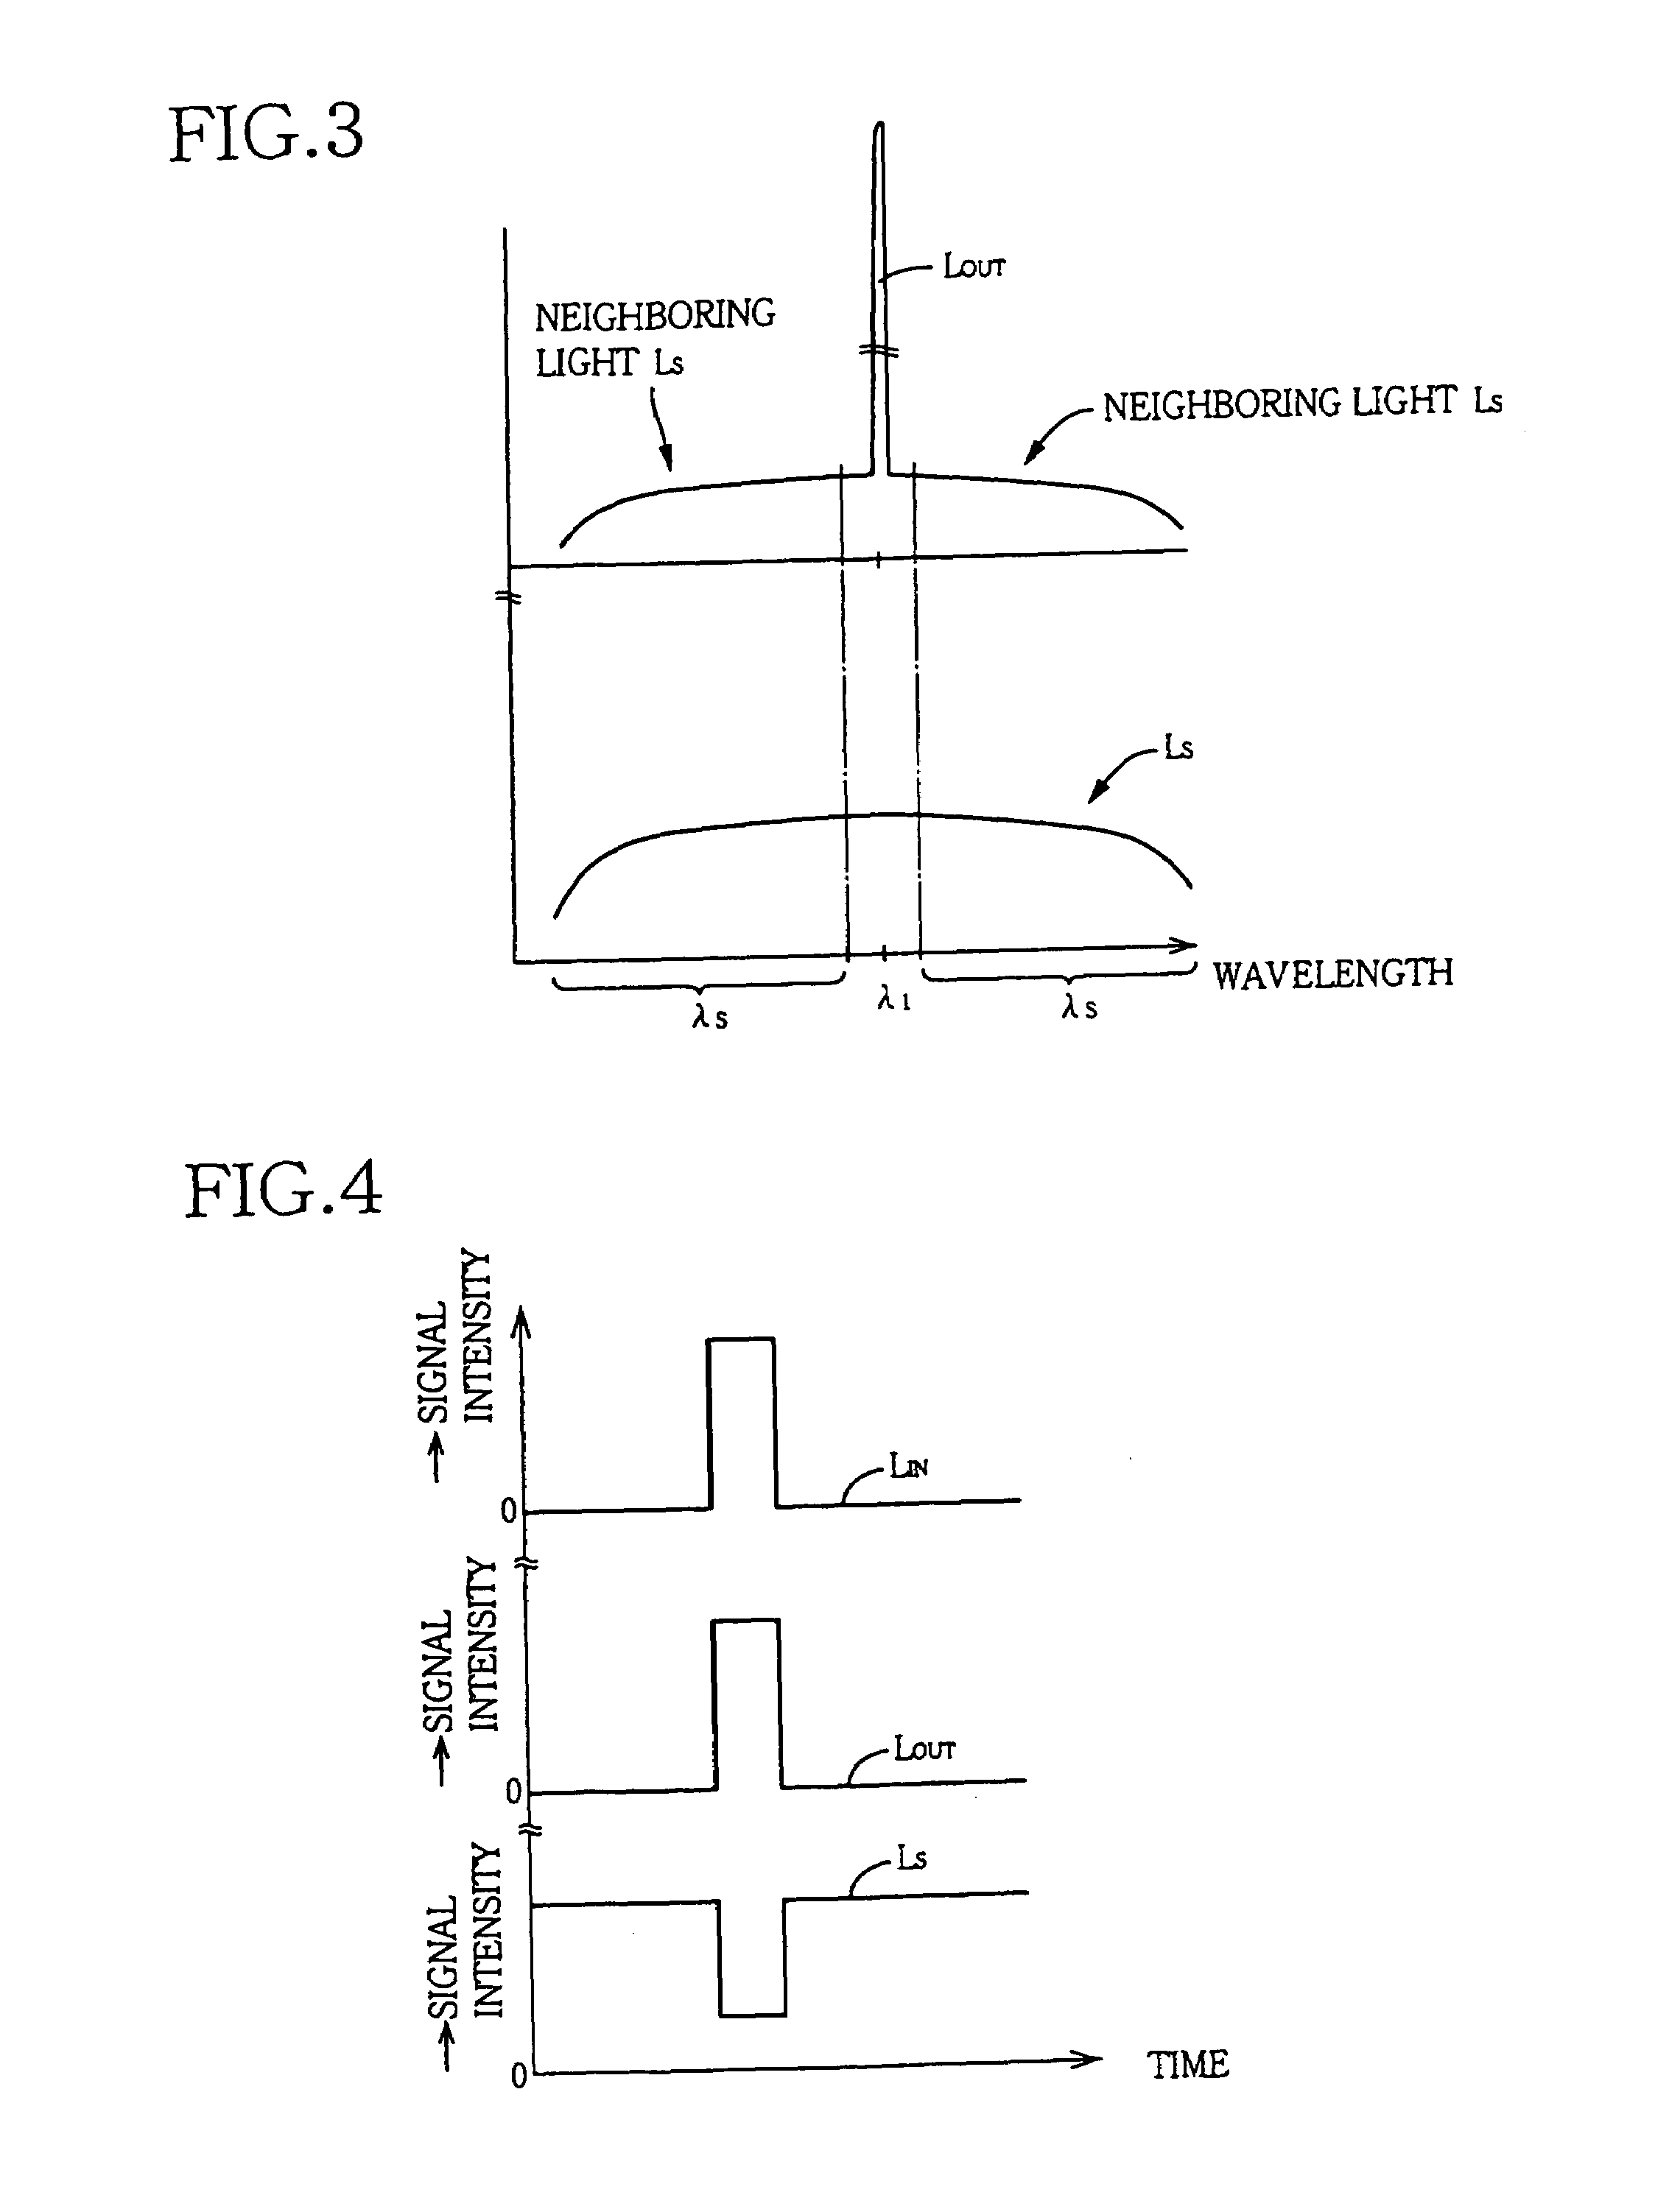 Optical signal amplification device